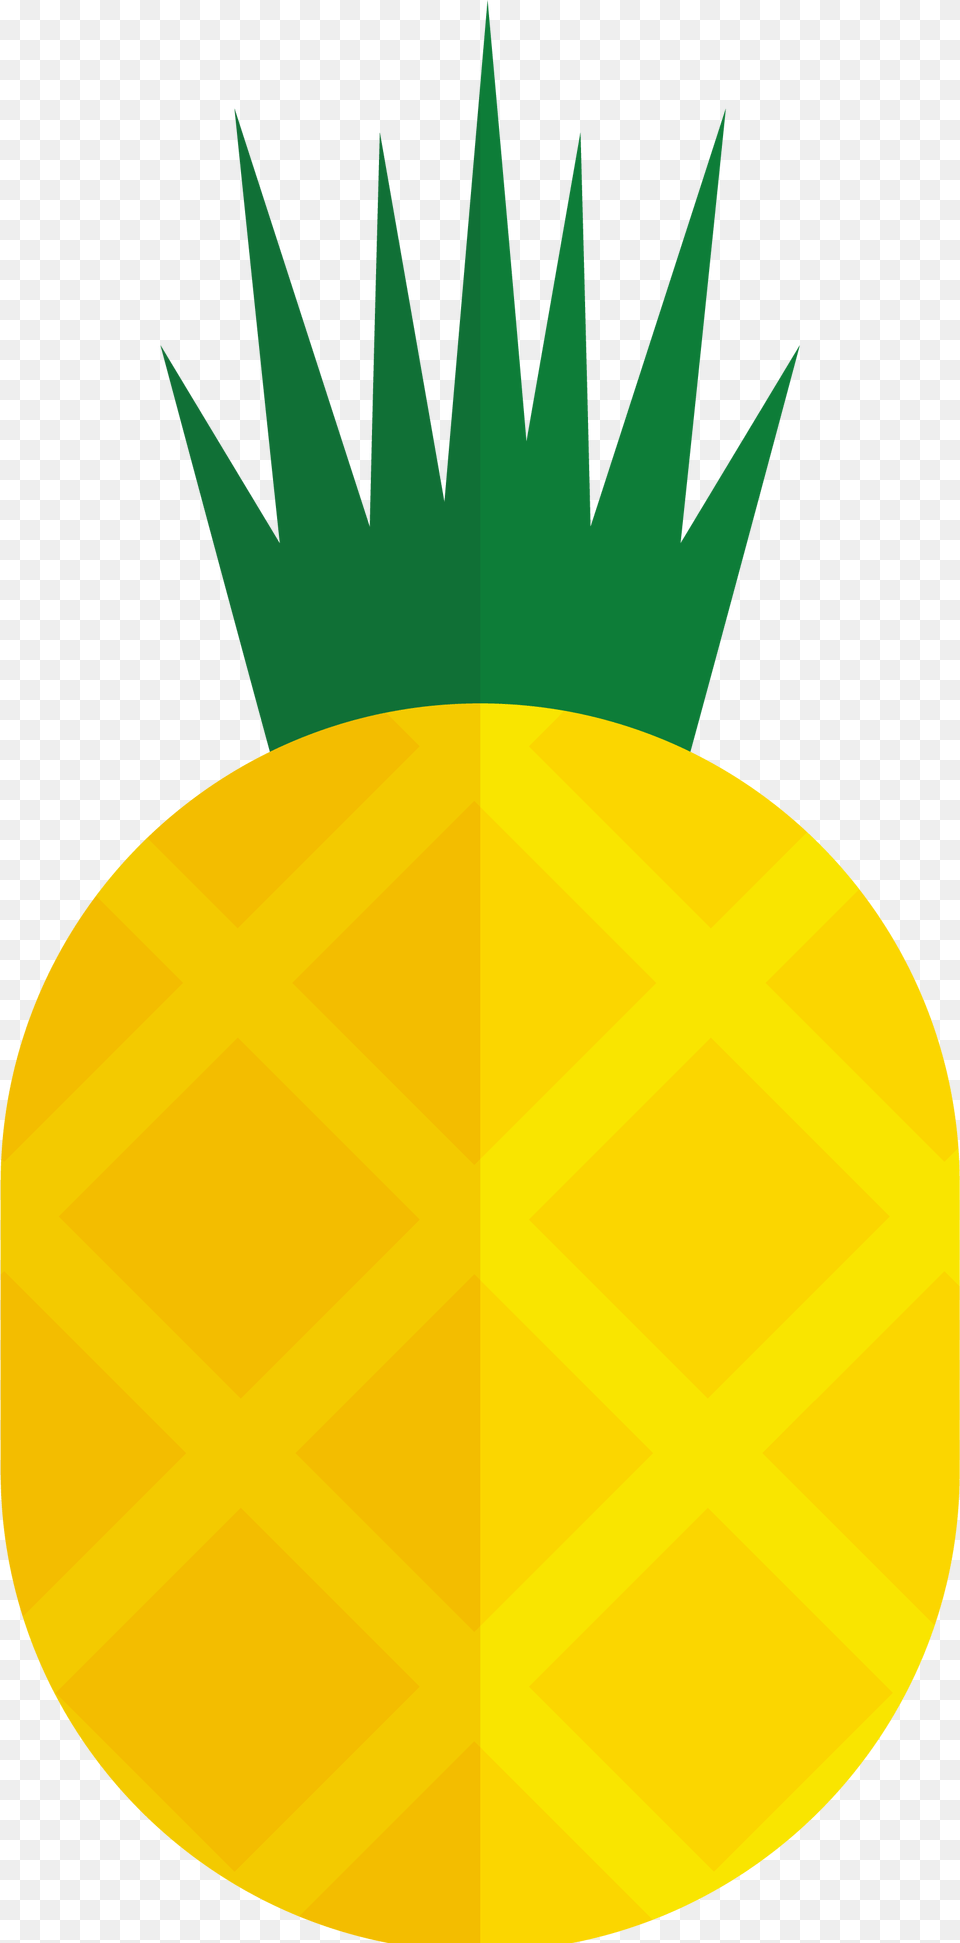 Collection Of Pineapple Vector Leaf, Food, Fruit, Plant, Produce Png